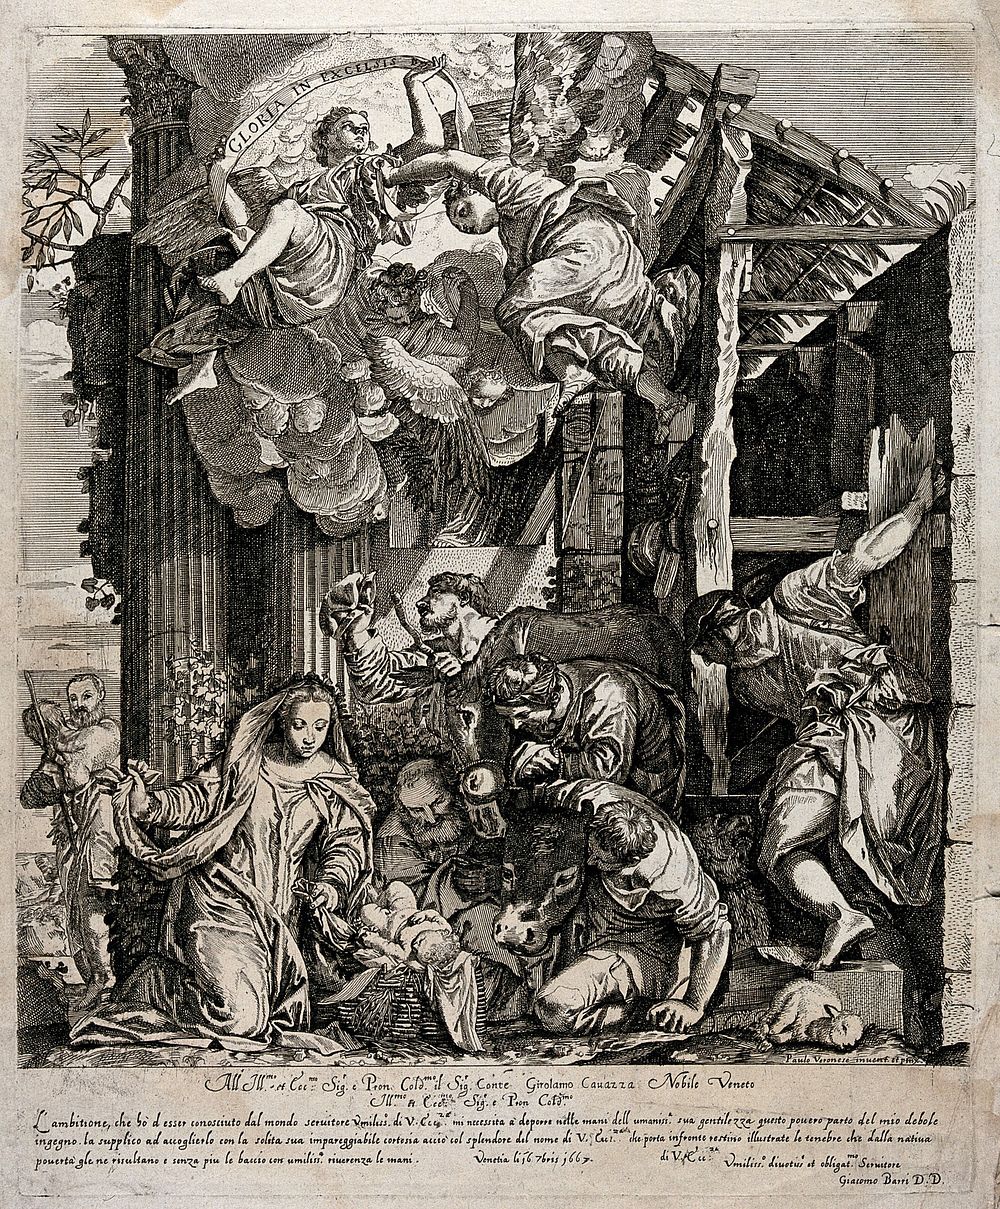 The adoration of the shepherds at the birth of Christ. Etching by G. Barri, 1667, after Paolo Caliari, il Veronese.